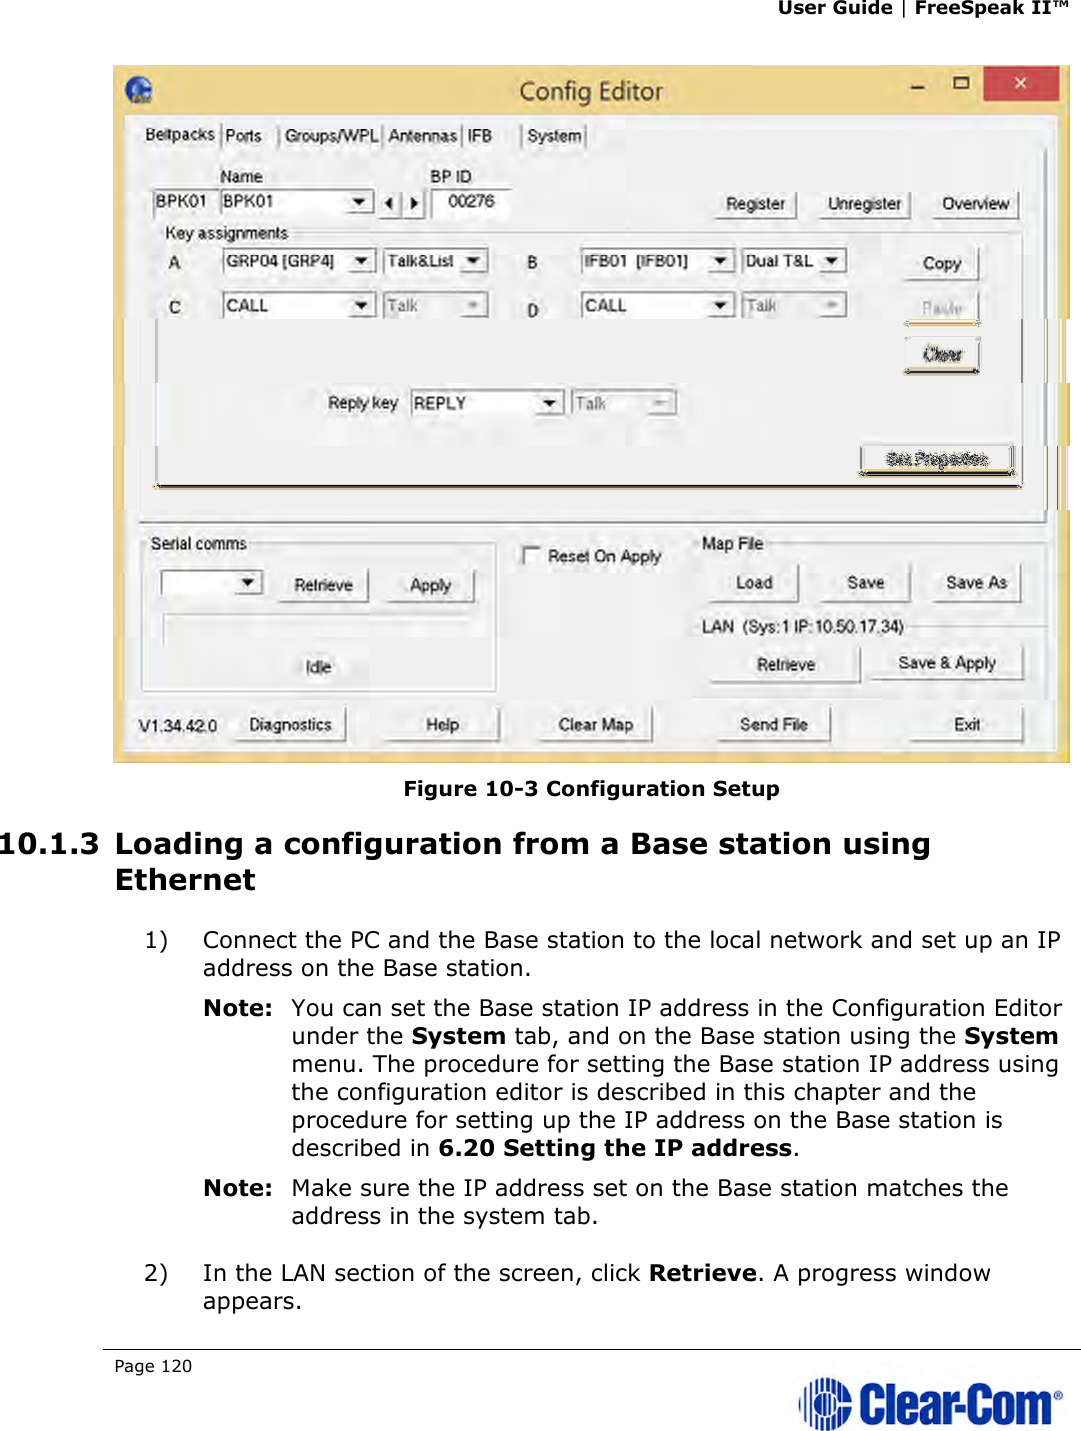 User Guide | FreeSpeak II™  Page 120    Figure 10-3 Configuration Setup 10.1.3 Loading a configuration from a Base station using Ethernet 1) Connect the PC and the Base station to the local network and set up an IP address on the Base station. Note: You can set the Base station IP address in the Configuration Editor under the System tab, and on the Base station using the System menu. The procedure for setting the Base station IP address using the configuration editor is described in this chapter and the procedure for setting up the IP address on the Base station is described in 6.20 Setting the IP address. Note: Make sure the IP address set on the Base station matches the address in the system tab. 2) In the LAN section of the screen, click Retrieve. A progress window appears. 